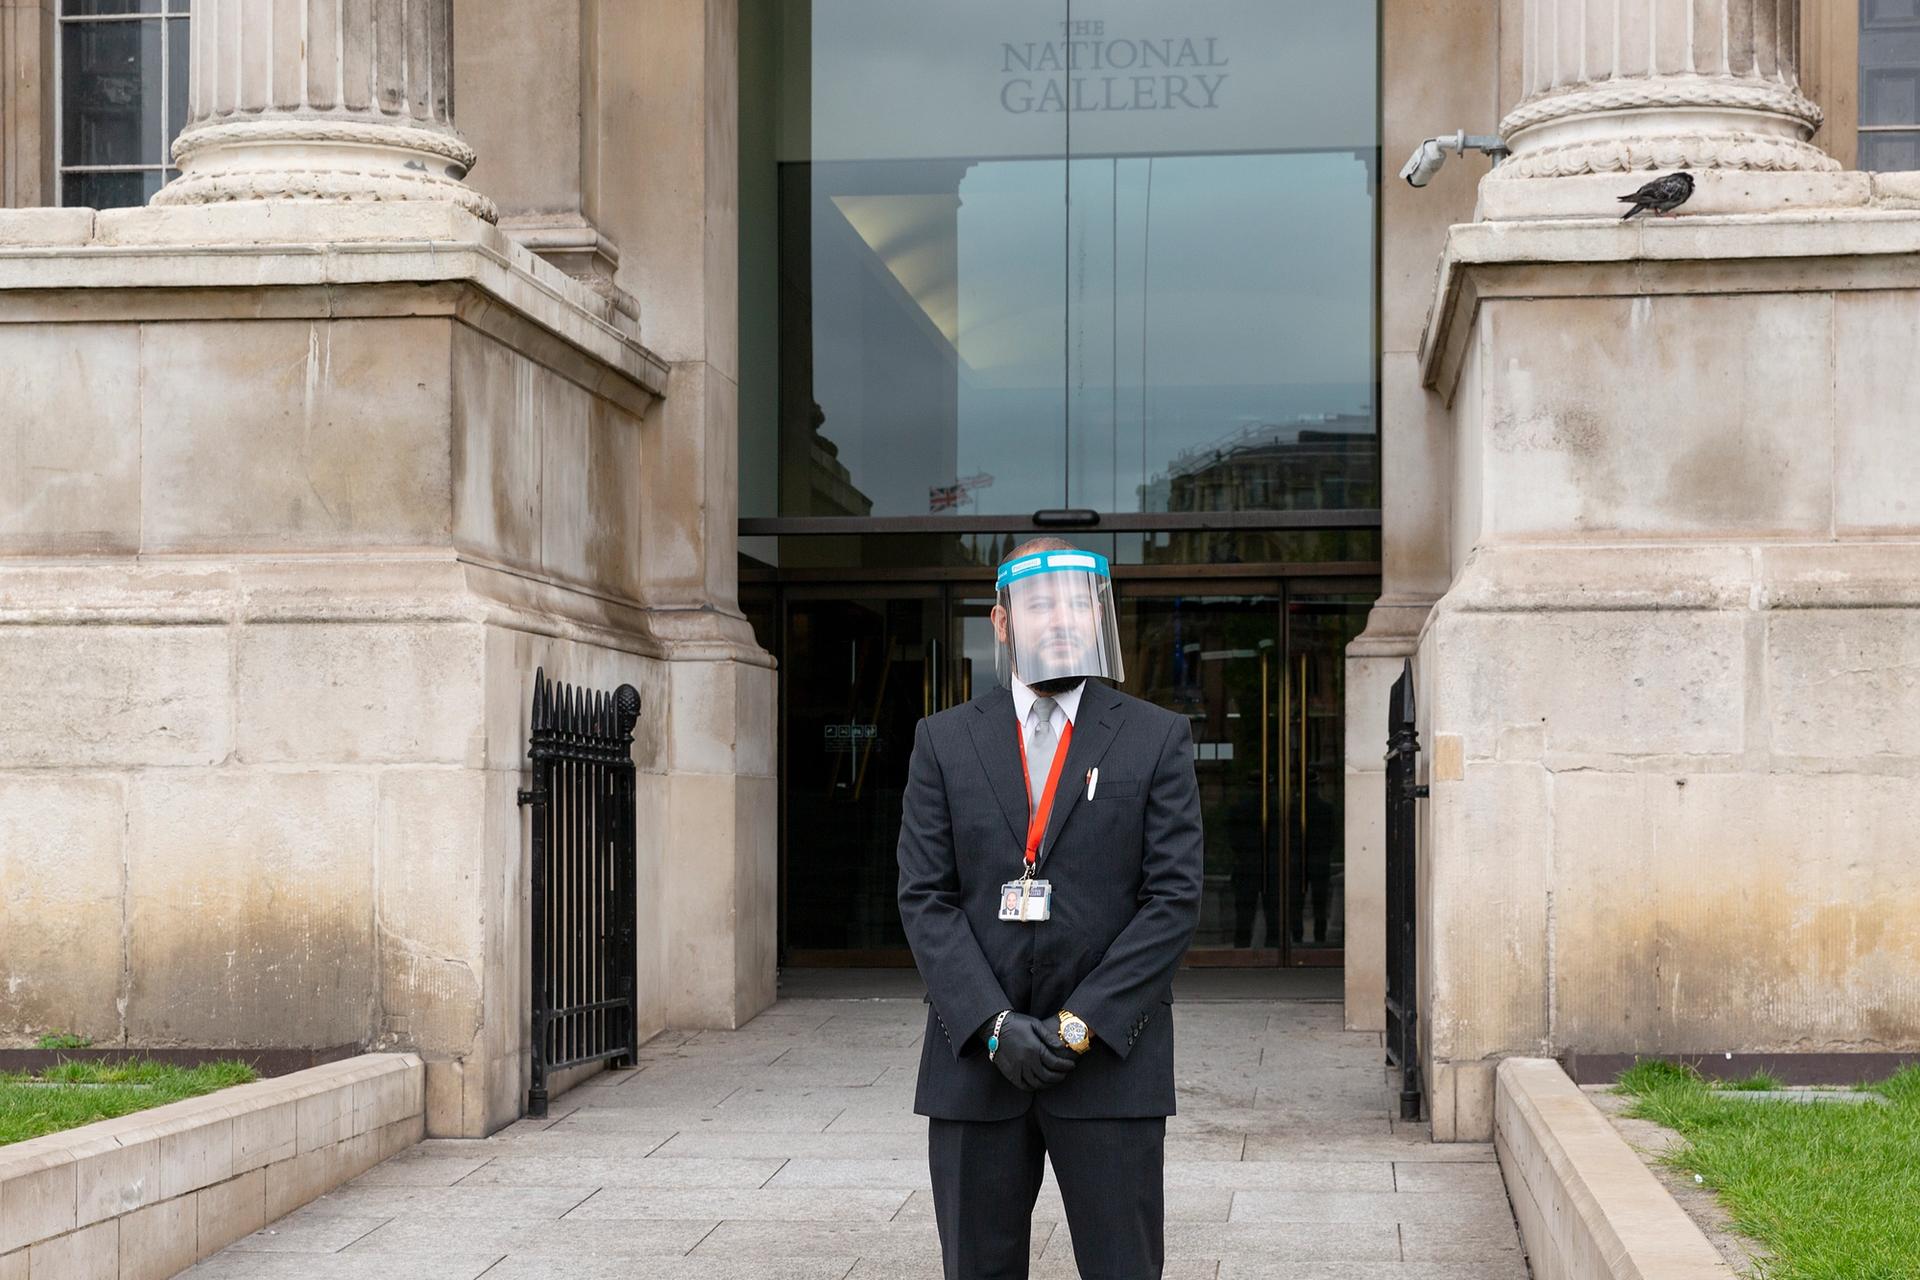 A member of security staff outside the National Gallery in London after lockdown © The National Gallery, London